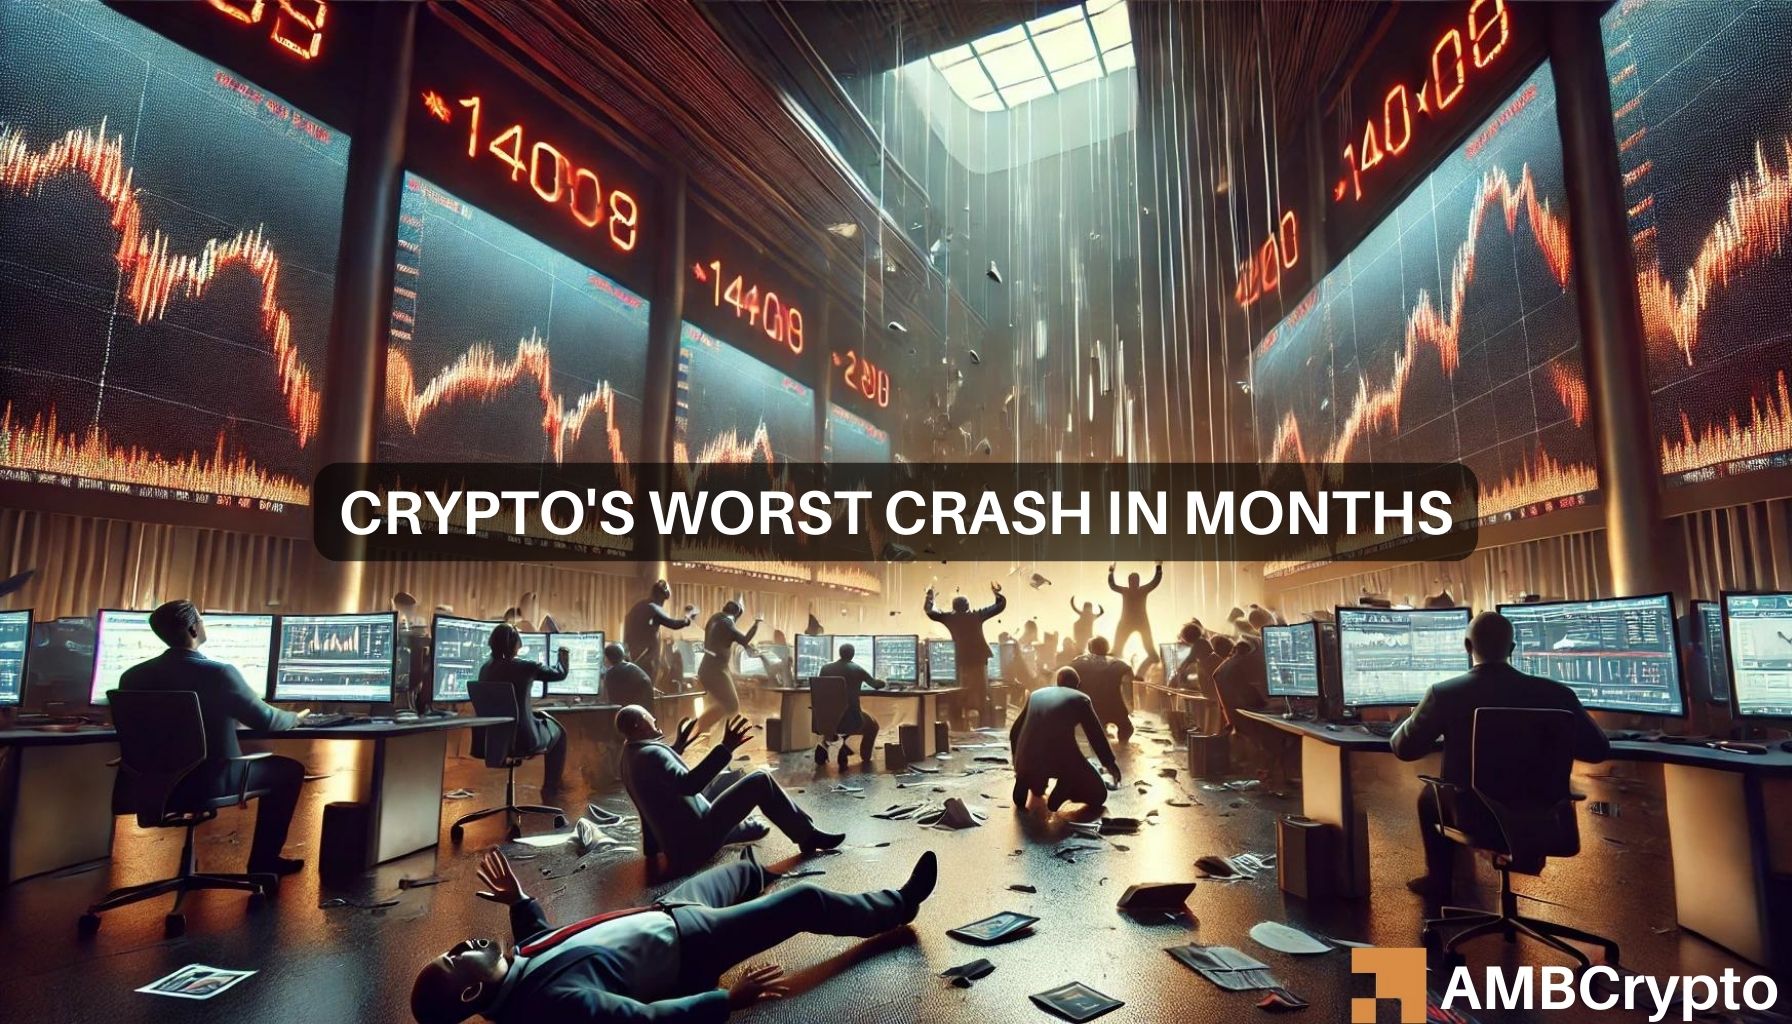 Why are crypto markets crashing? Liquidations hit $1B in 24 hours!